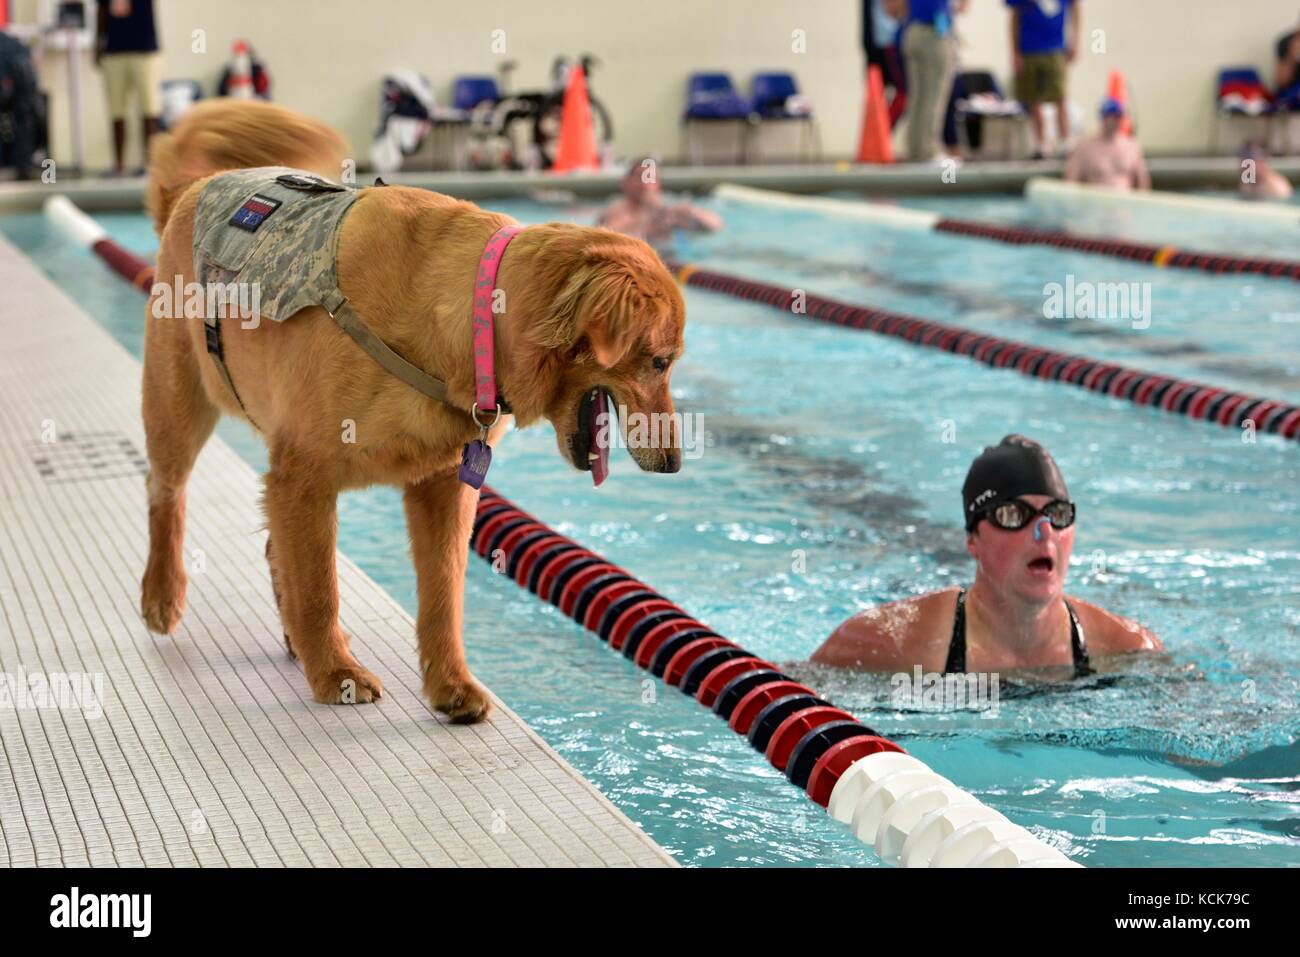 Military service dog Moxie runs alongside the pool while her handler warms up for the Department of Defense Warrior Games swimming competition at the University of Illinois July 8, 2017 in Chicago, Illinois. The DoD Warrior Games allow wounded, ill and injured soldiers and veterans to compete in Paralympic-style sports.  (photo by Alexandria Rockford  via Planetpix) Stock Photo